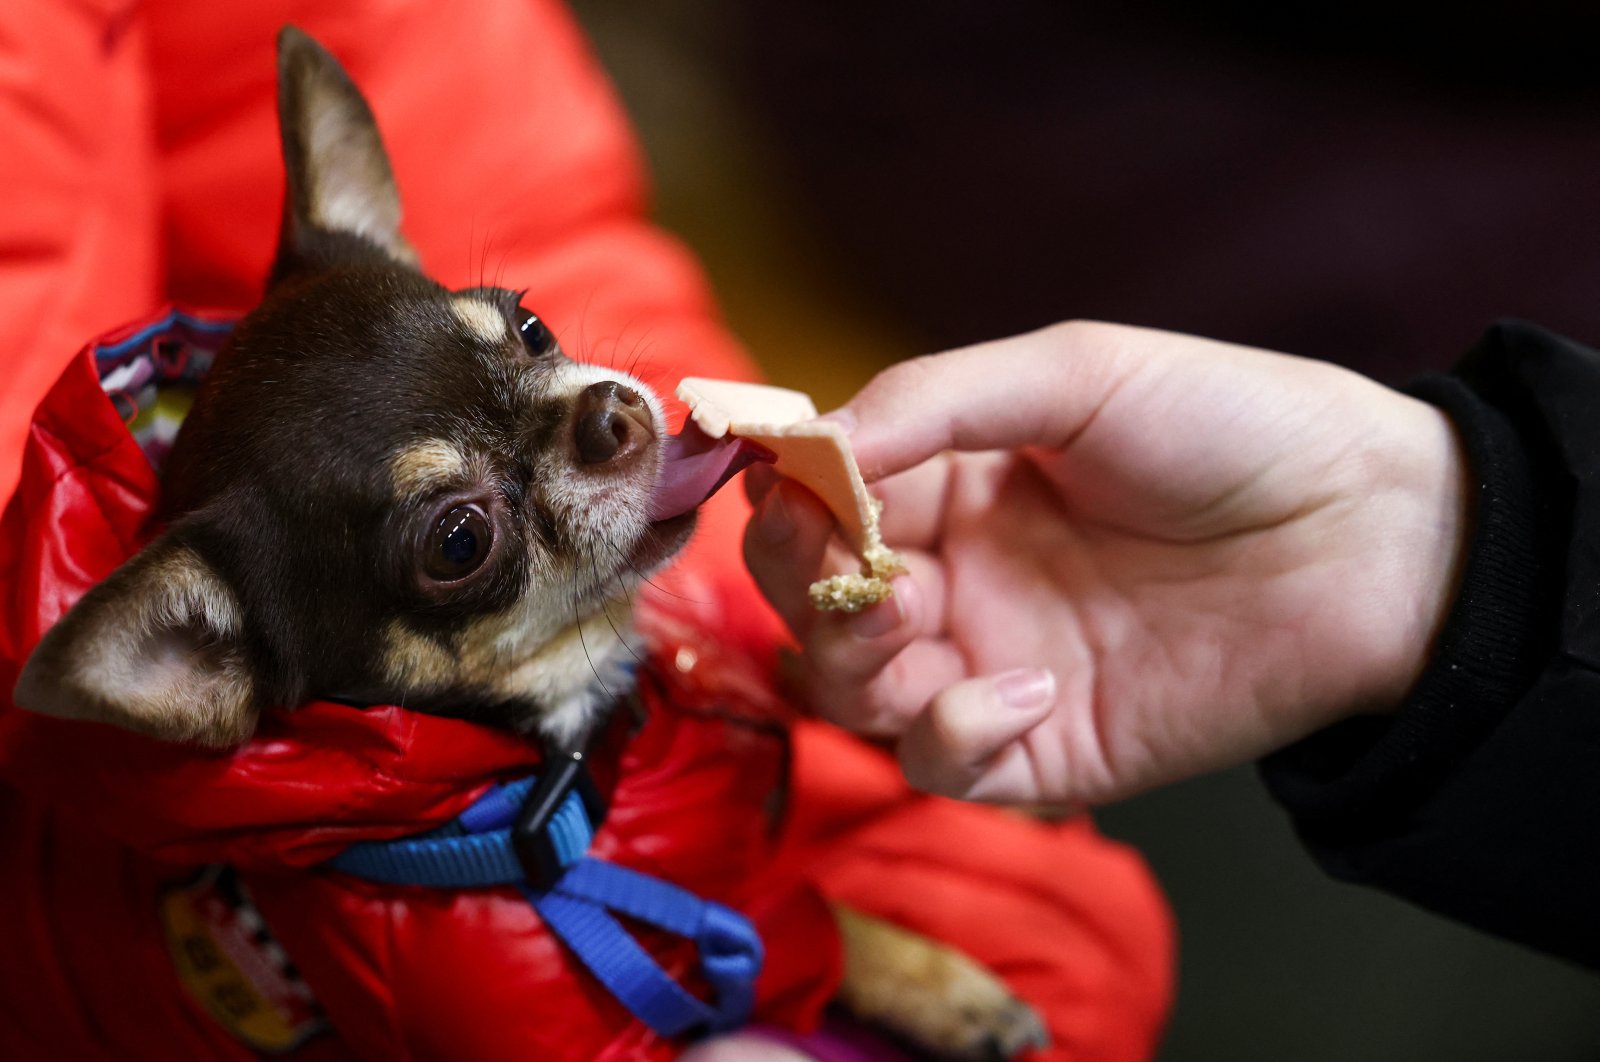 Women from Ukraine, Alina and Elena, feed their dog Archie as they wait for transport after arriving at Berlin&#039;s central station, following Russia&#039;s invasion of Ukraine, in Berlin, Germany, March 7, 2022. (REUTERS)